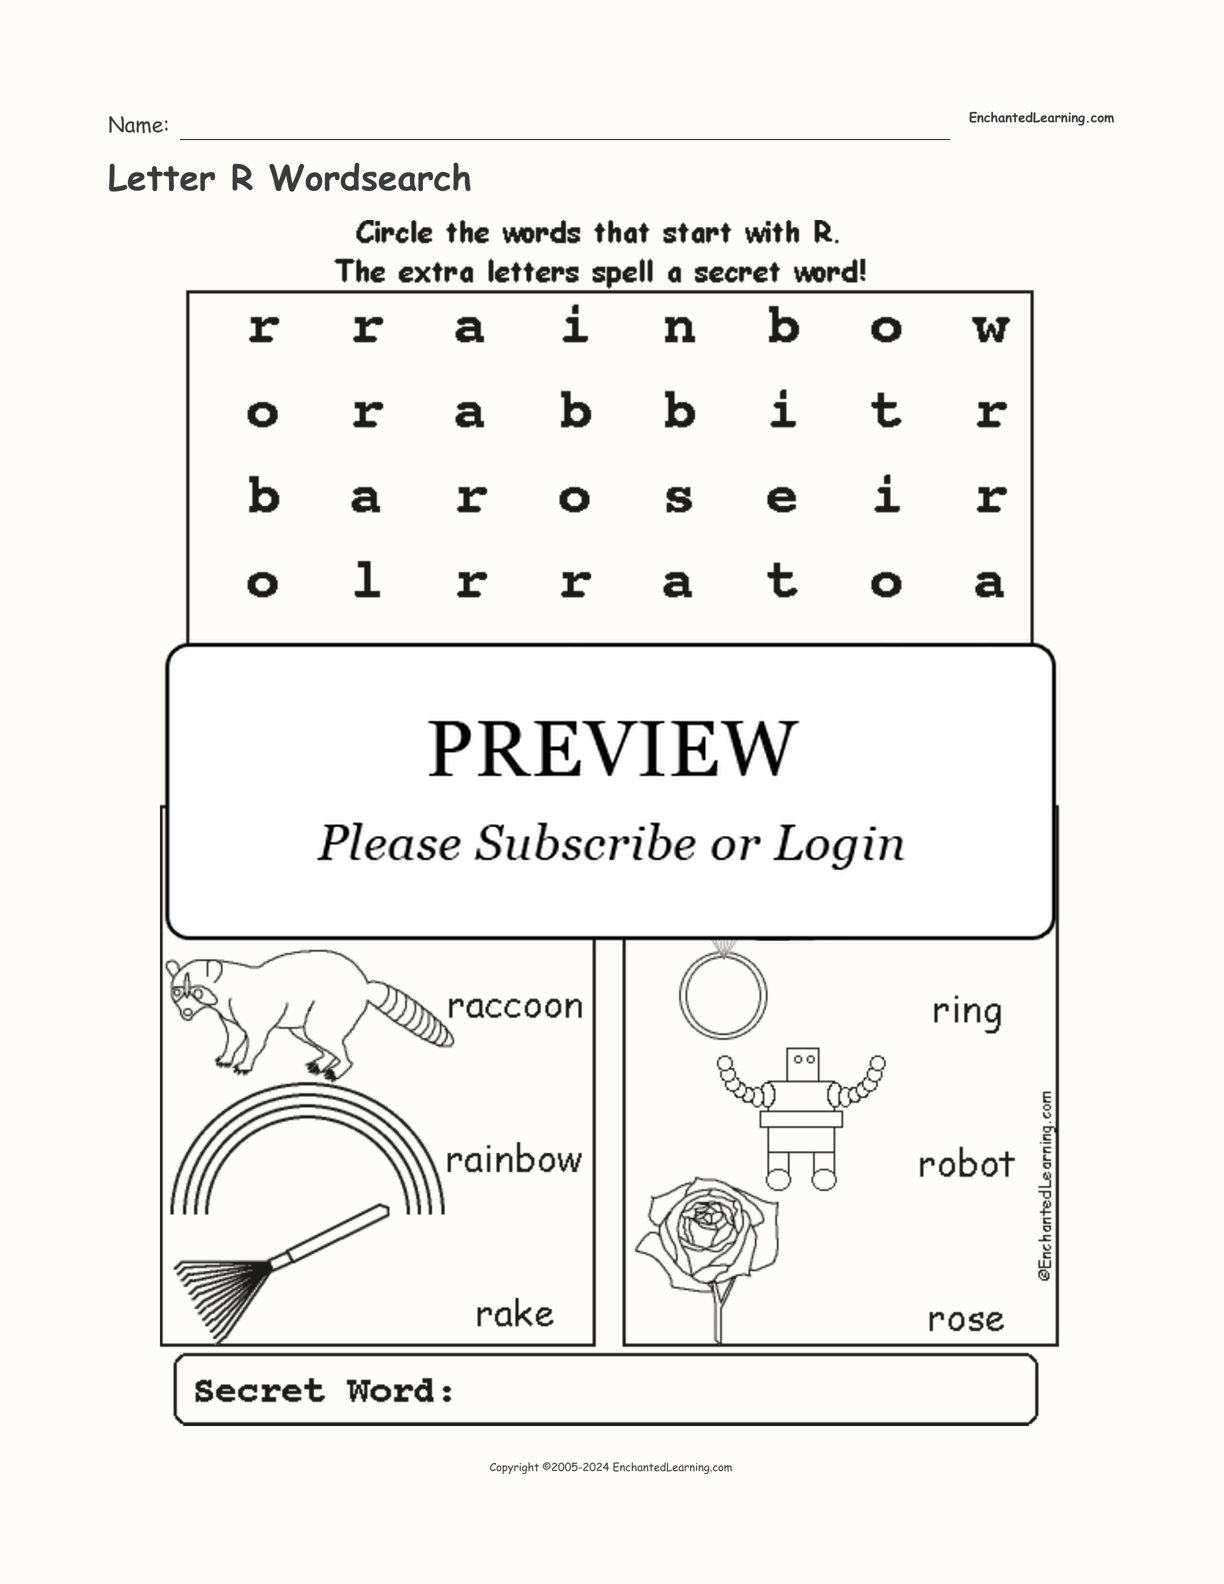 Letter R Wordsearch interactive worksheet page 1